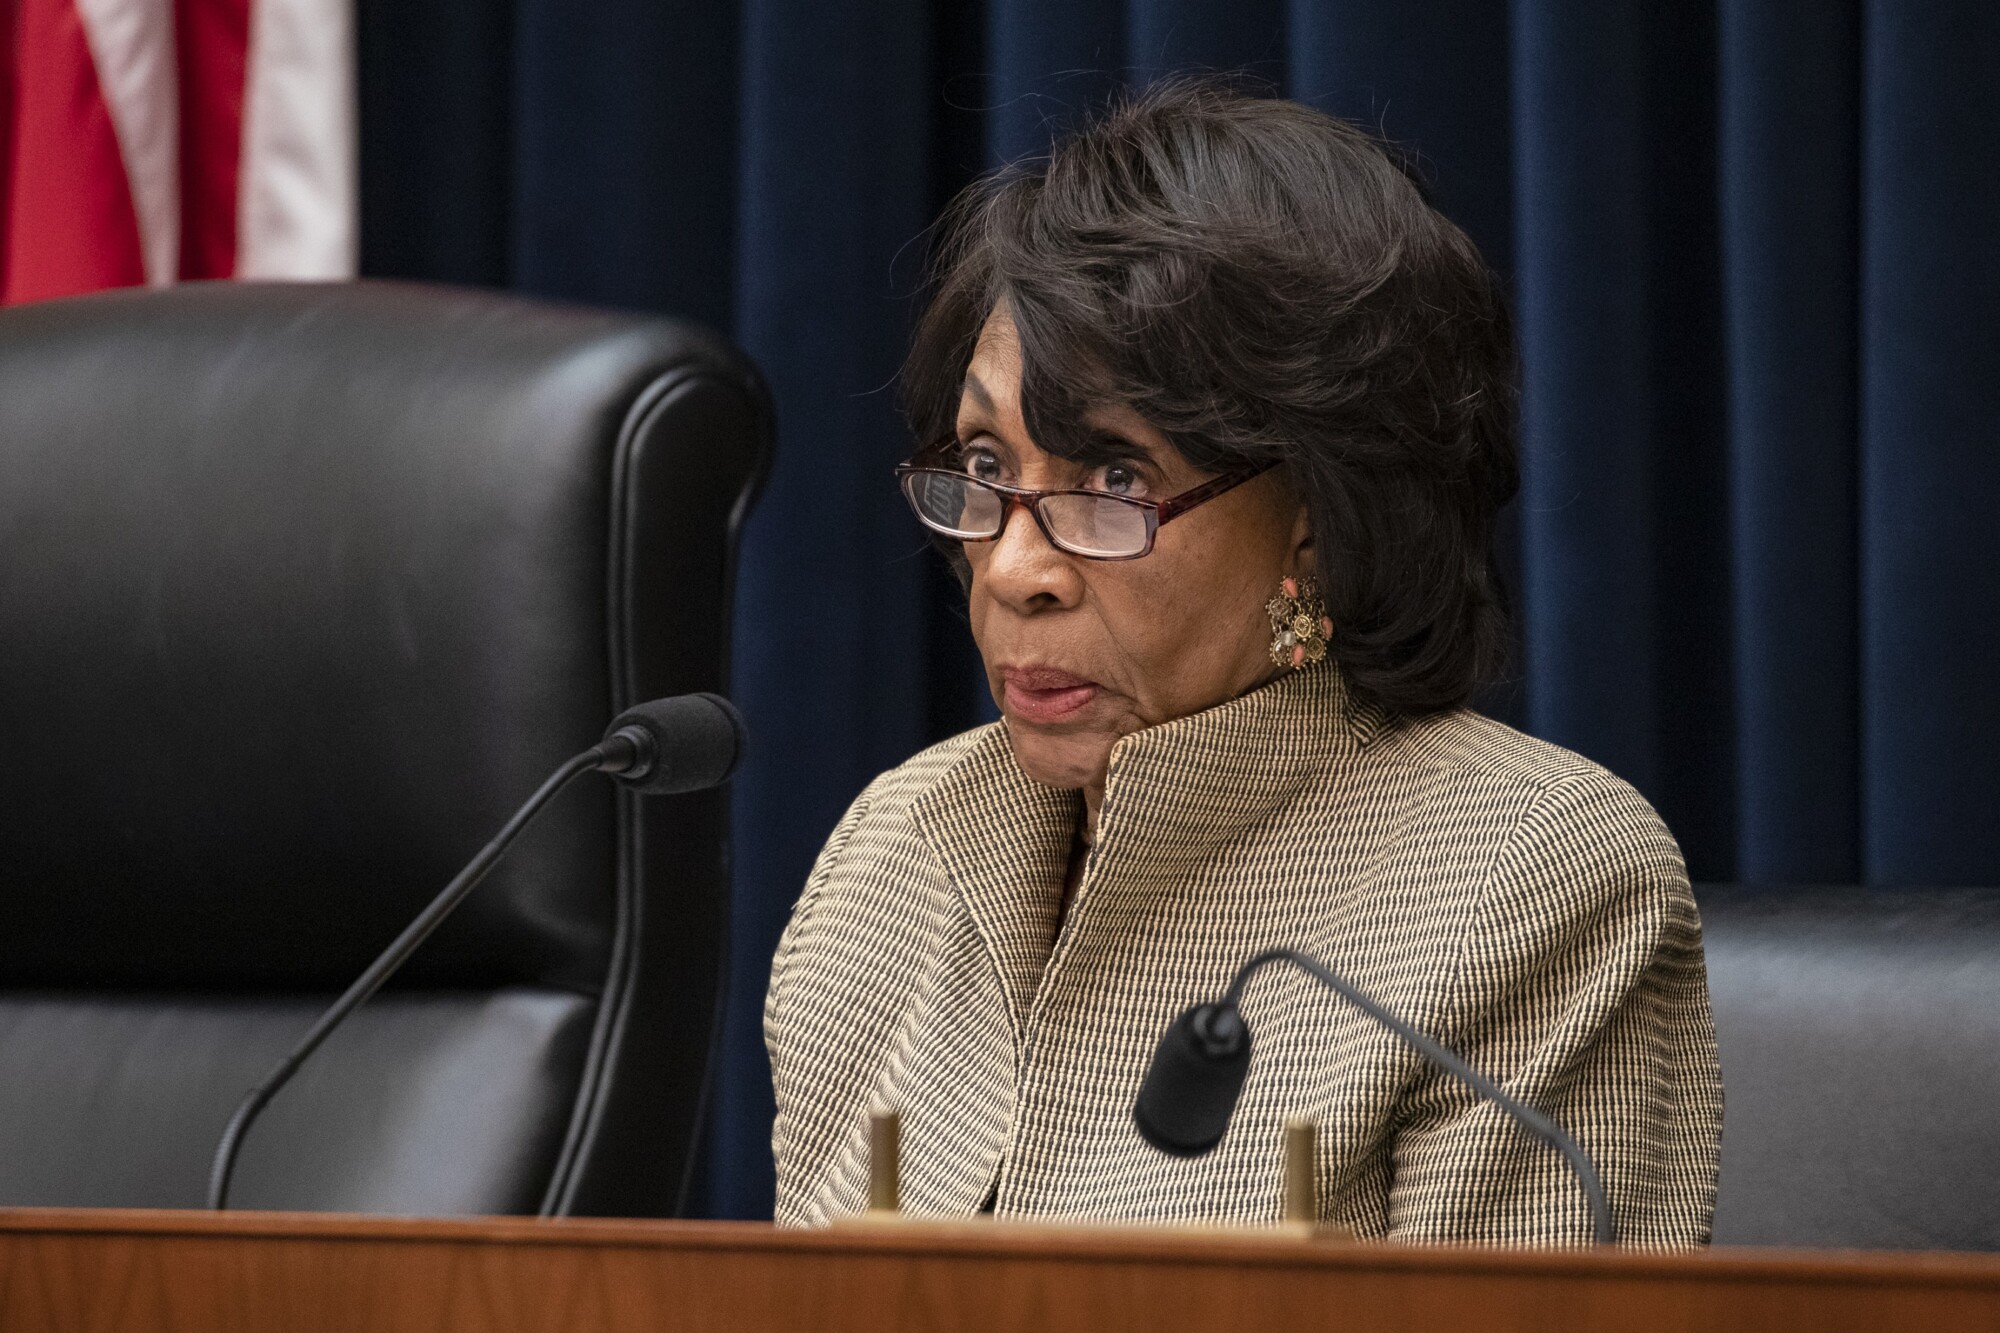 Rep. Waters Paid Daughter $192,000 in Campaign Funds: Report